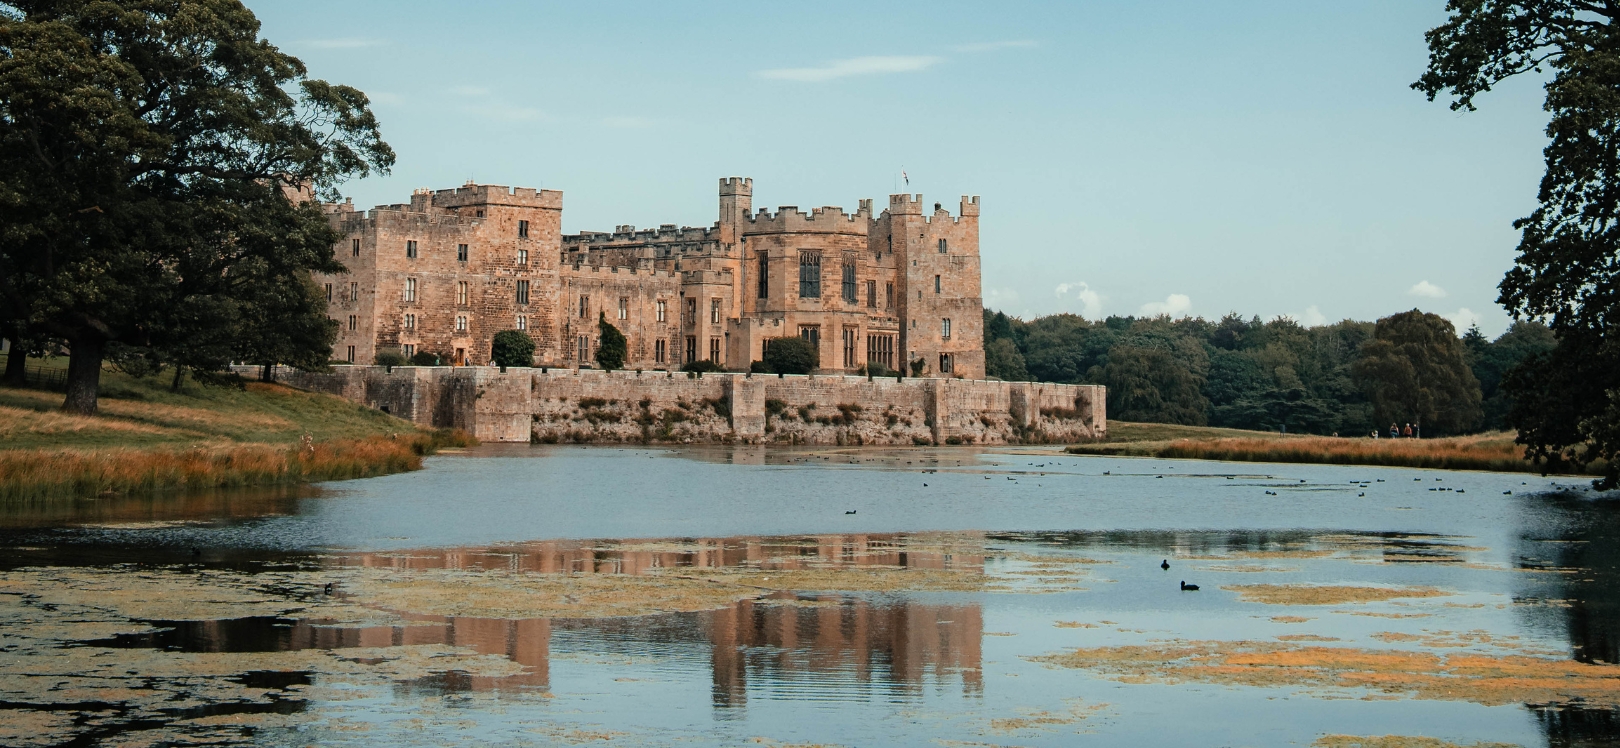 Raby Castle and the lake